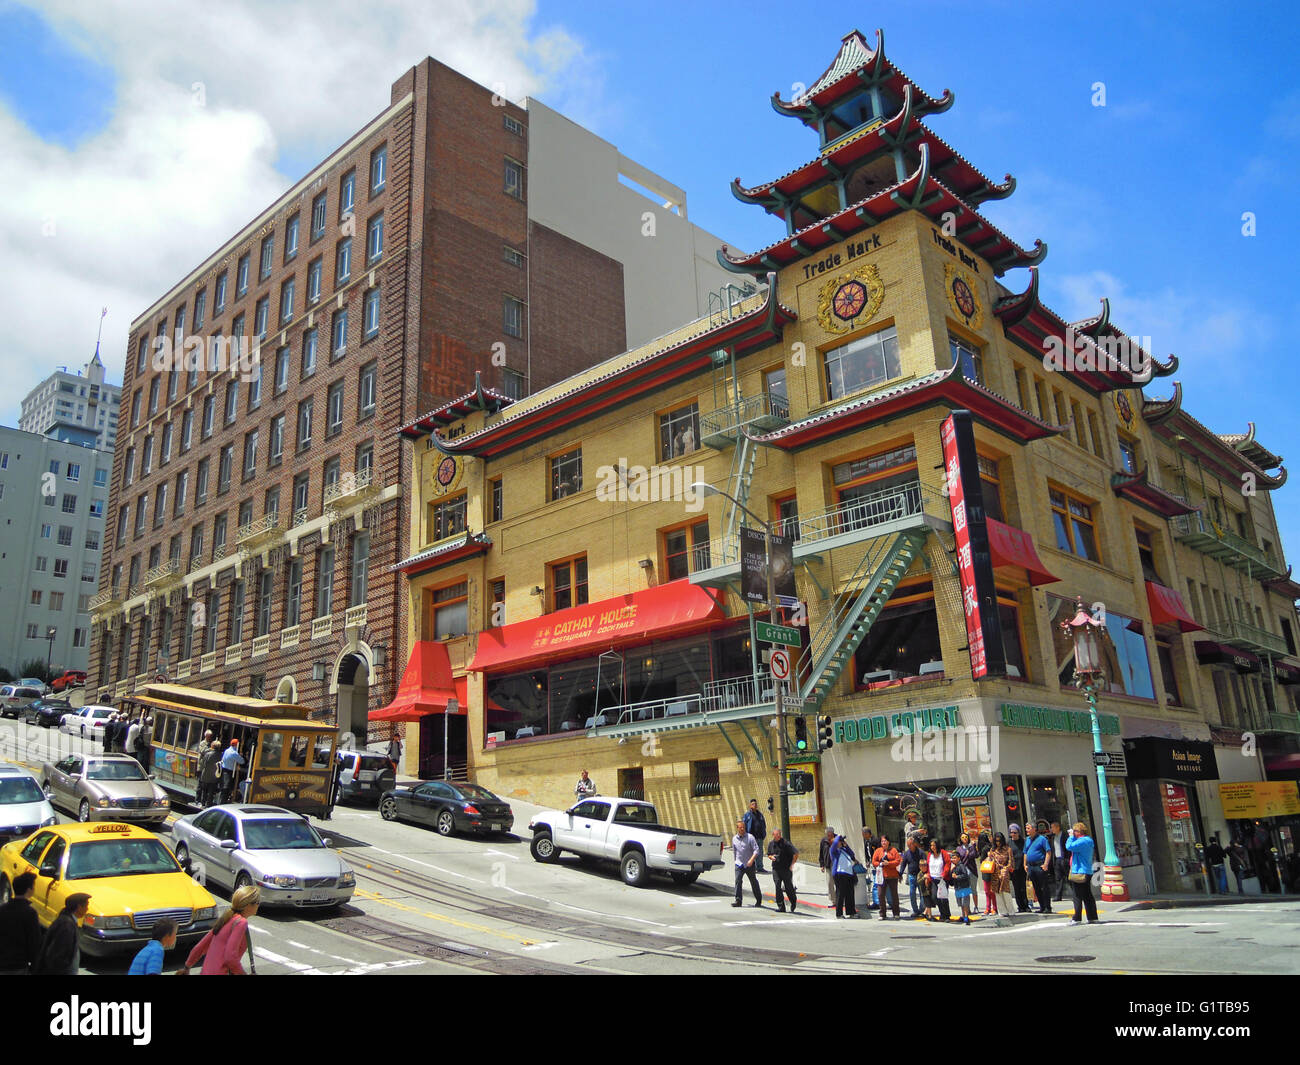 San Francisco: skyline with the oriental buildings of Chinatown, the oldest Chinatown in North America and the largest Chinese community outside Asia Stock Photo